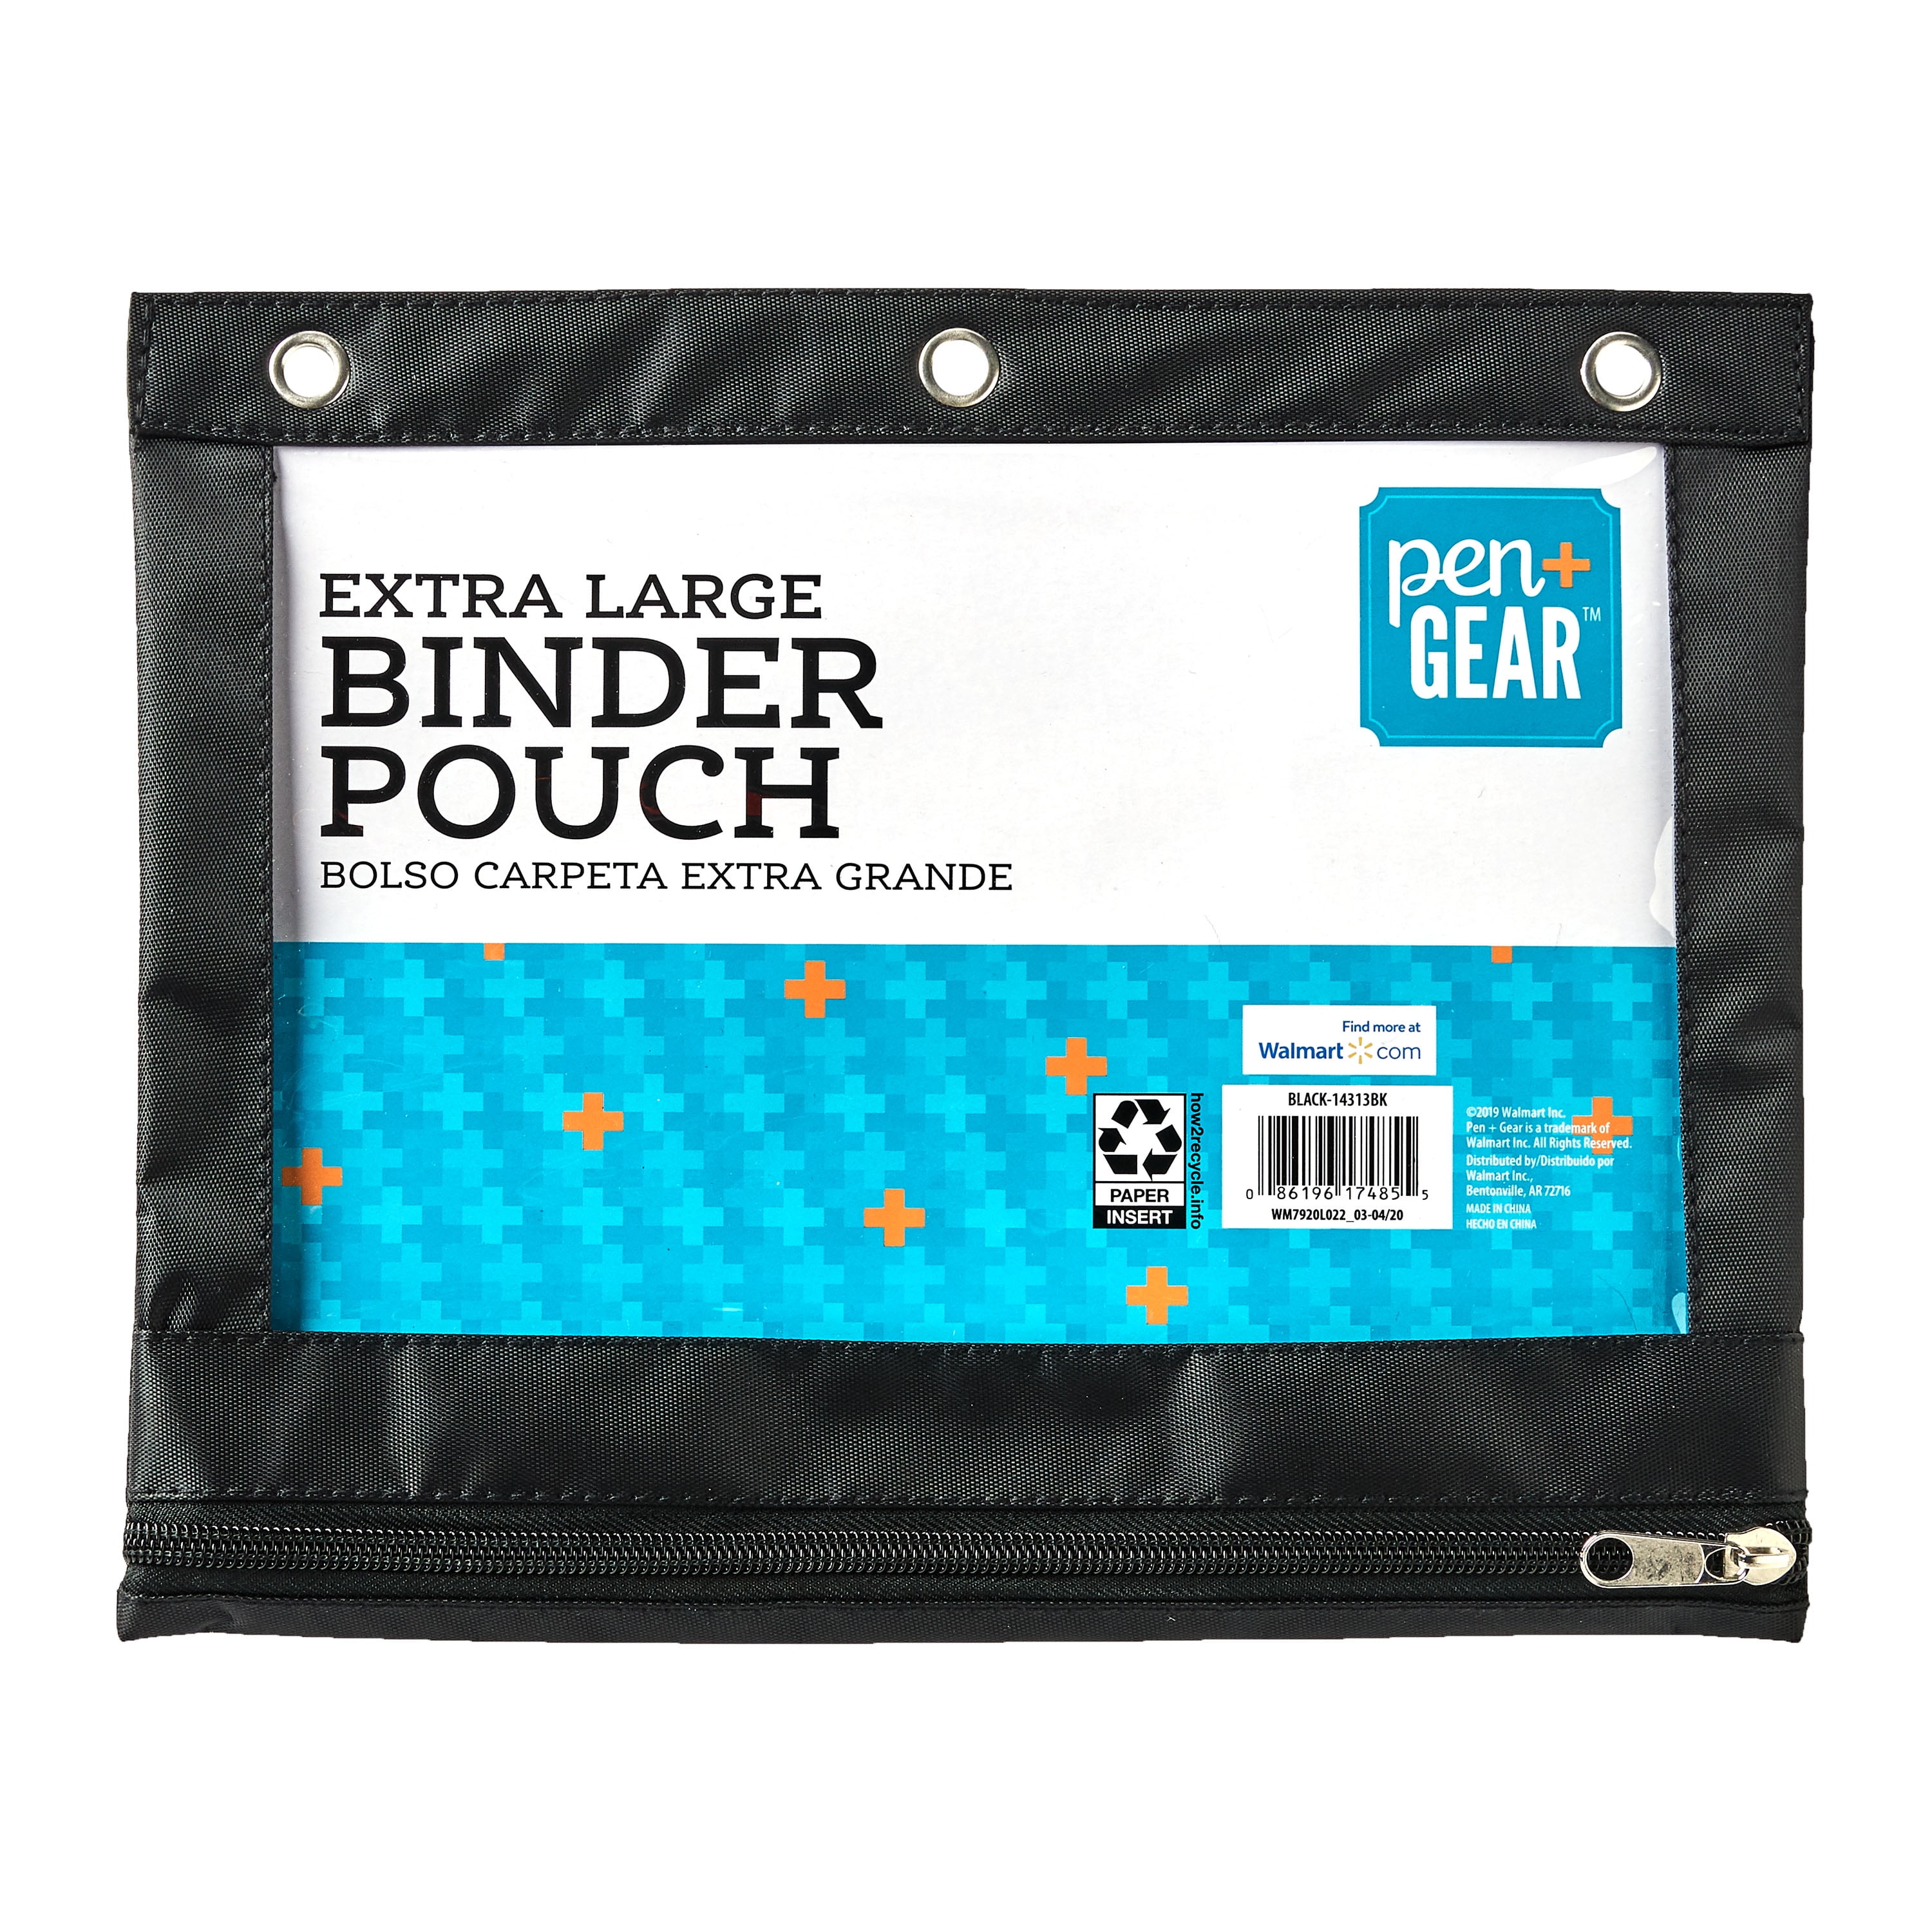 Pen + Gear Extra Large Polyester Binder Pouch Pencil Case, Black